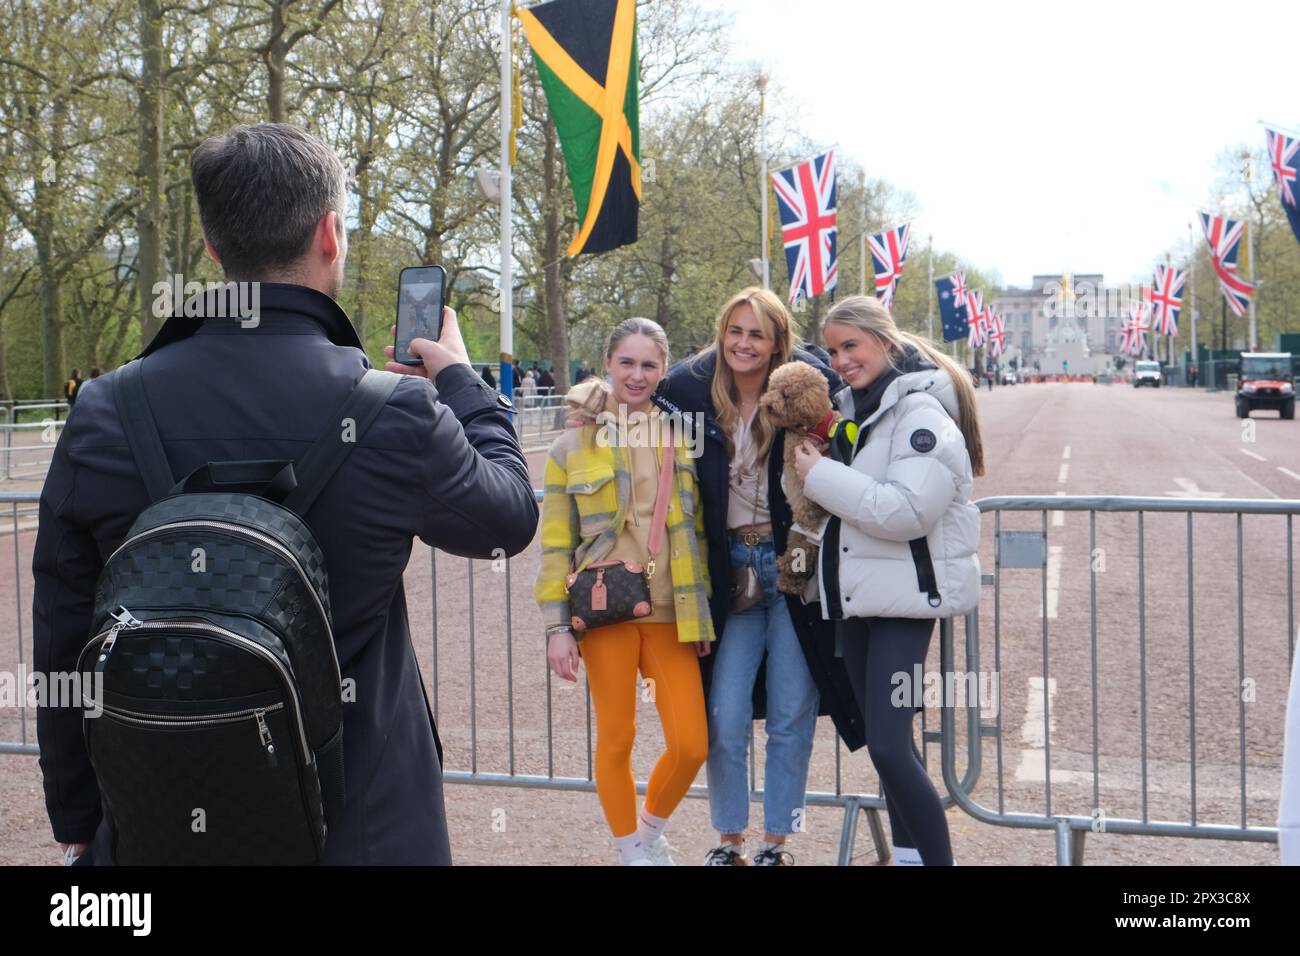 London, UK. Tourists take a photo in the Mall, decorated with Union Jacks and the commonwealth flags ahead of the King's Coronation. Stock Photo